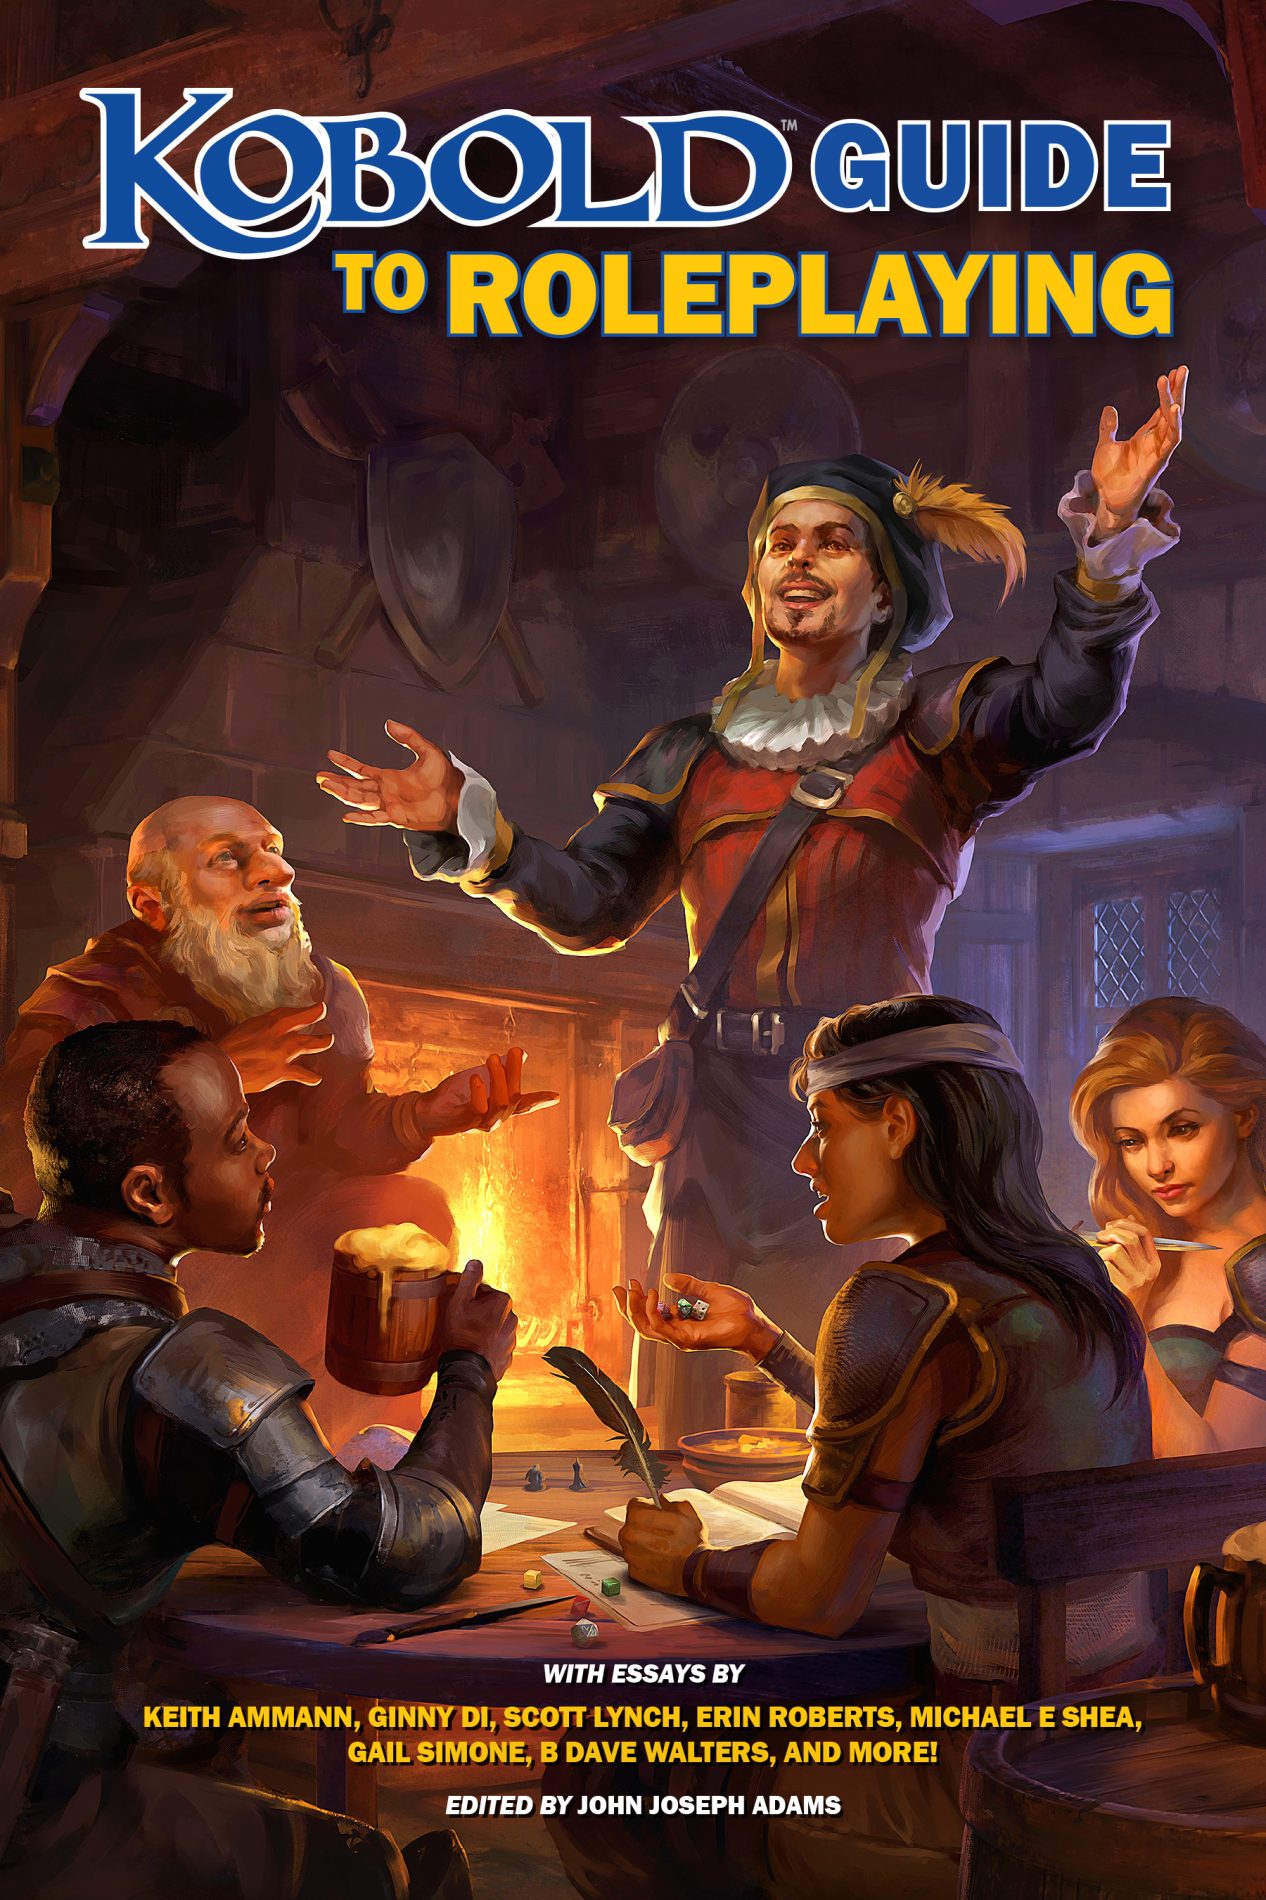 Review: The Kobold Guide to Roleplaying